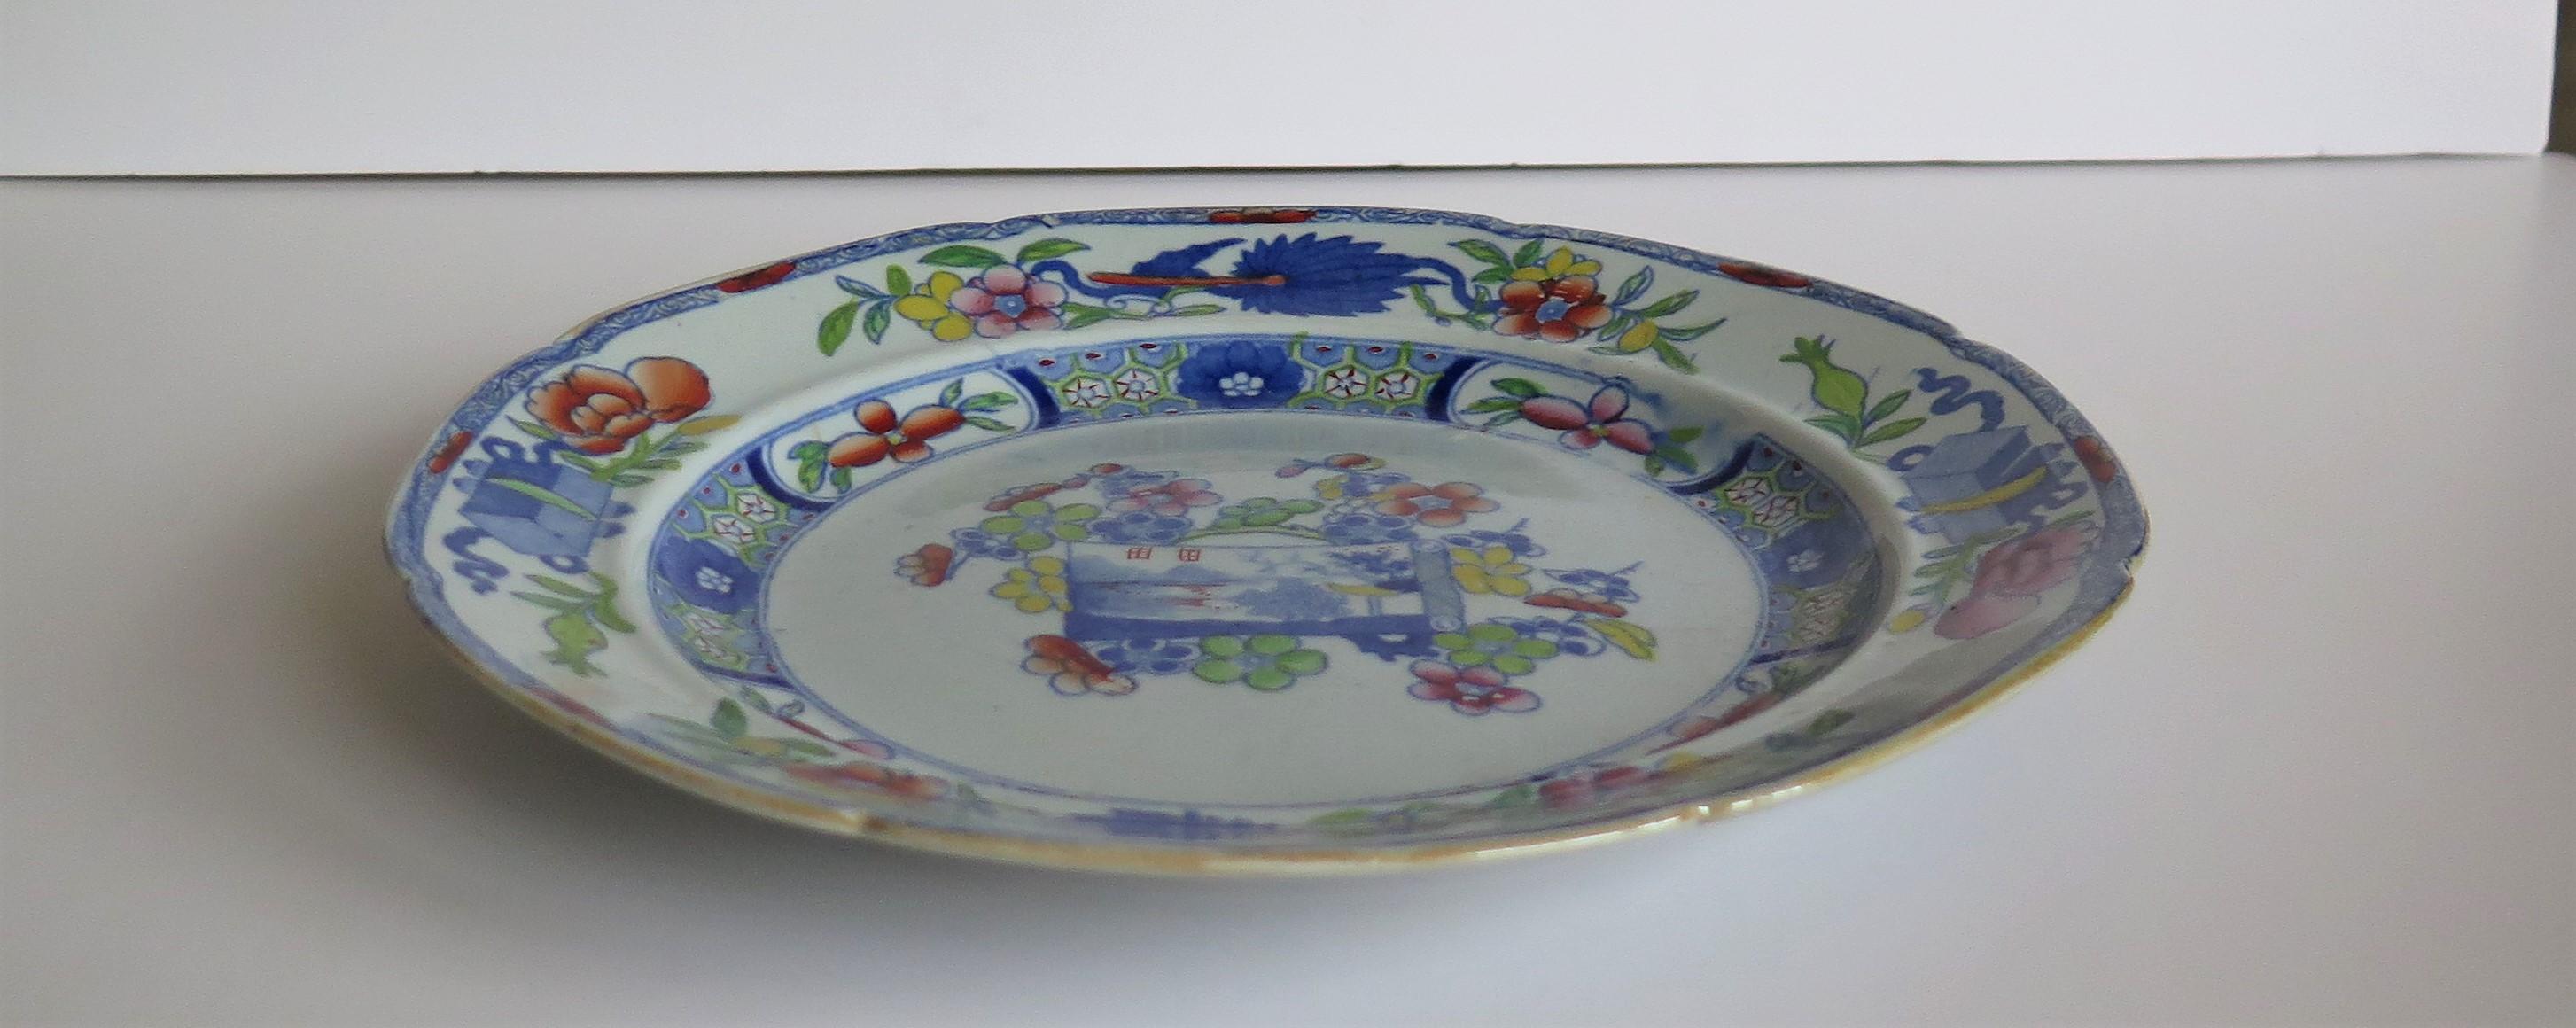 Hand-Painted Very Early Mason's Ironstone Deep Plate Scroll Landscape and Prunus Rare Pattern